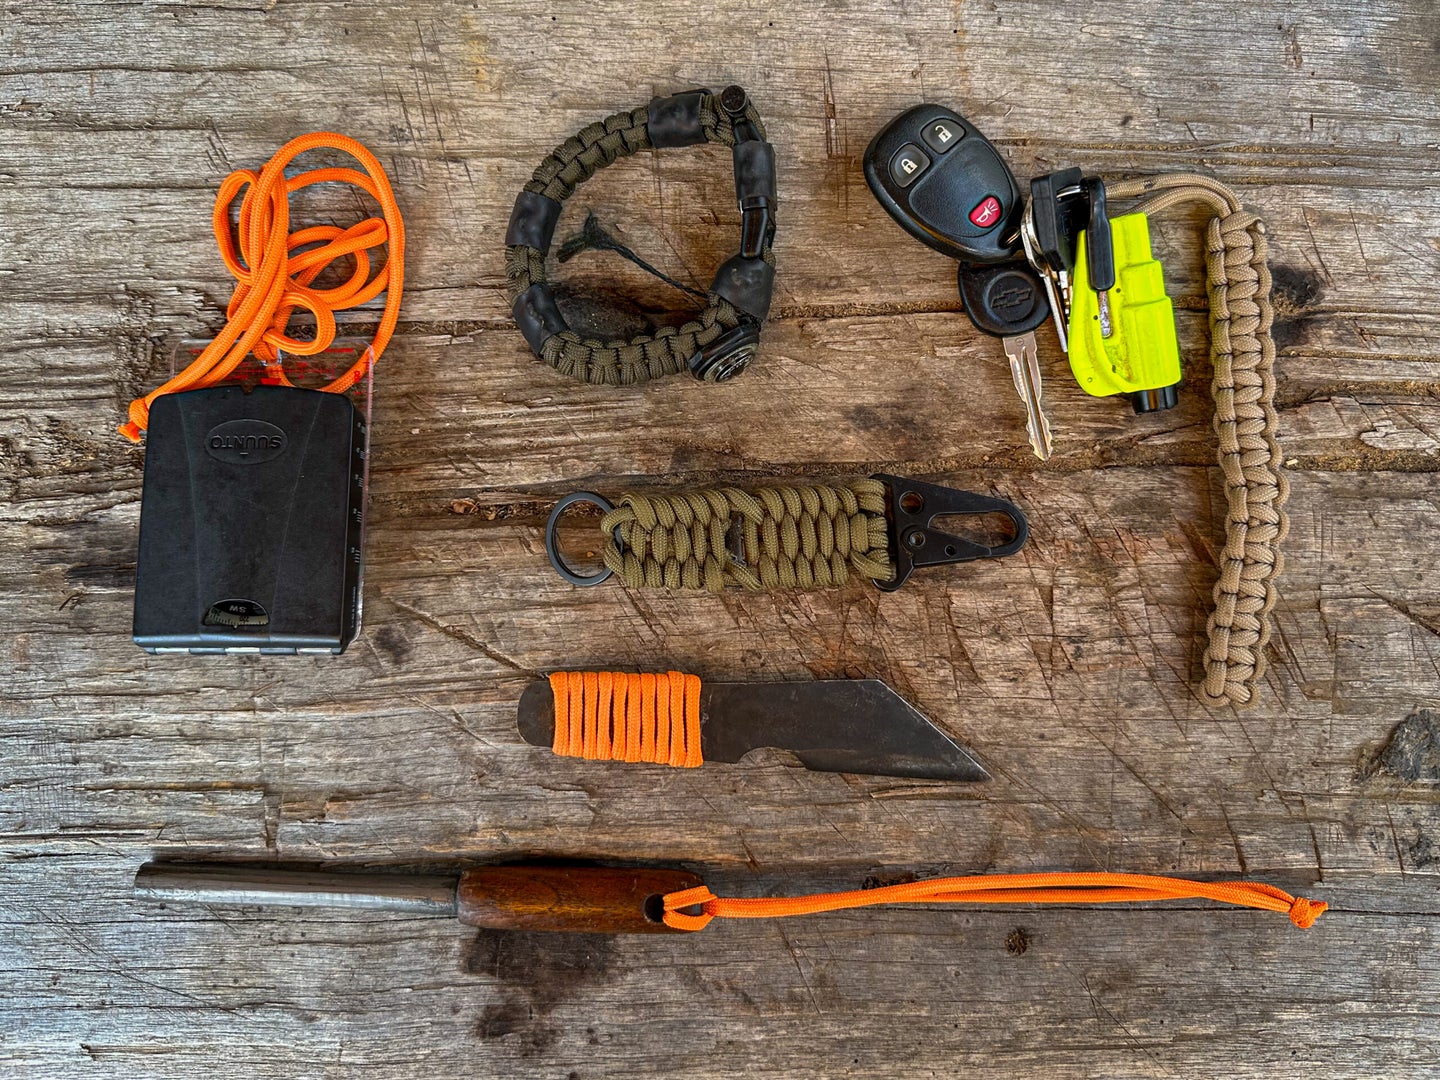 Various survival tools with parachute cord on a wooden surface